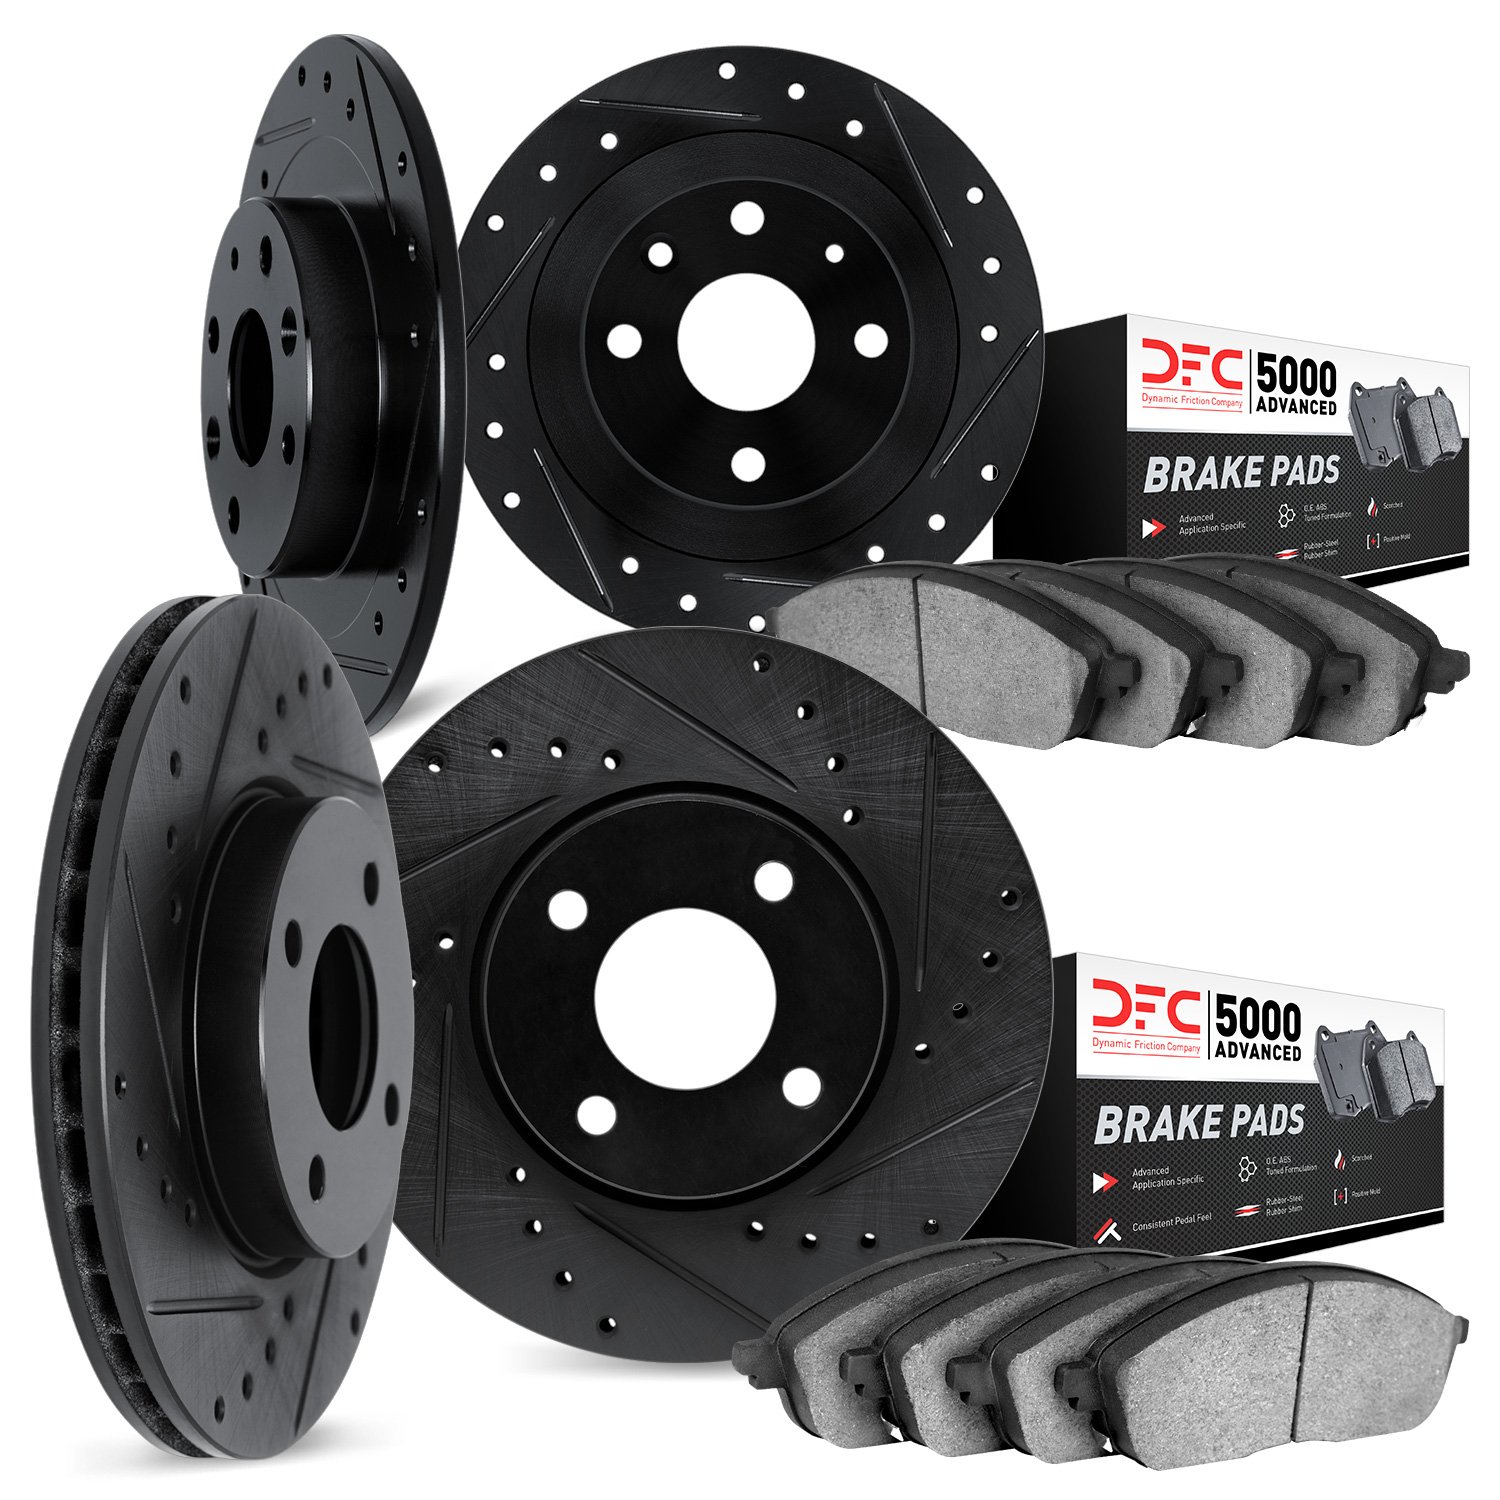 8504-47241 Drilled/Slotted Brake Rotors w/5000 Advanced Brake Pads Kit [Black], 2014-2016 GM, Position: Front and Rear